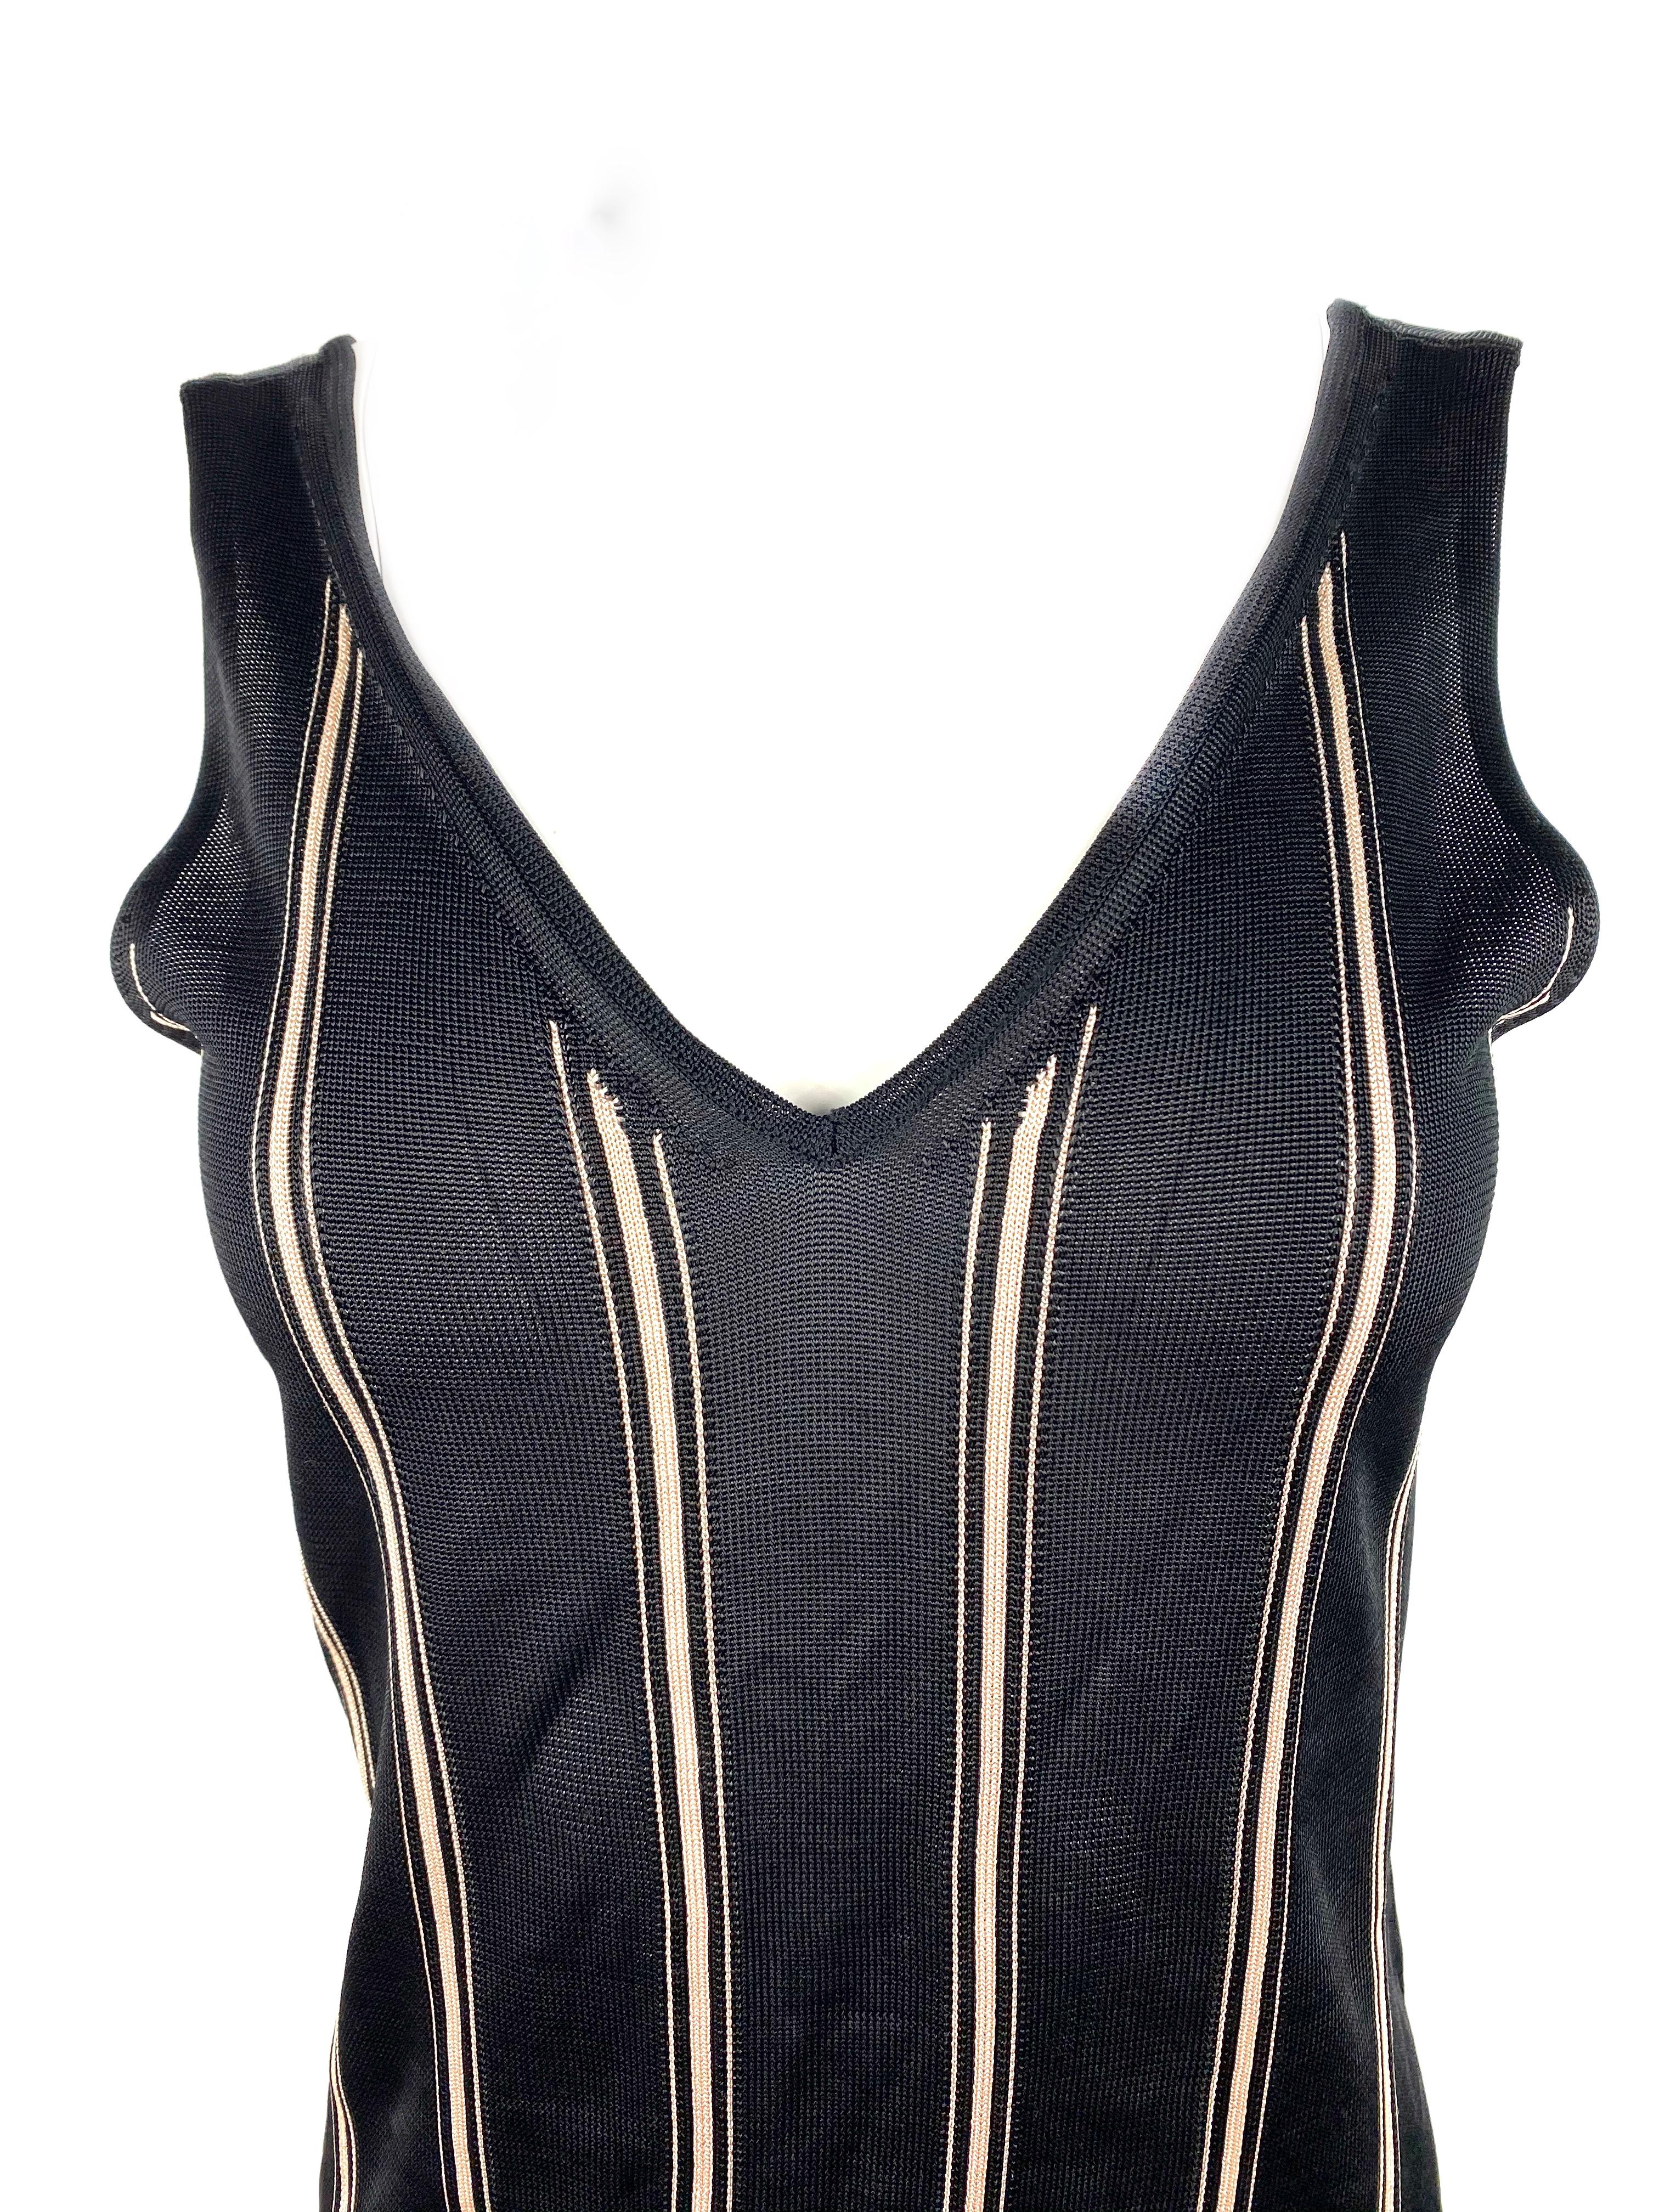 Product details:

Featuring black V- neck vest styled top with ivory/ cream horizontal striped pattern.
Made in Italy.